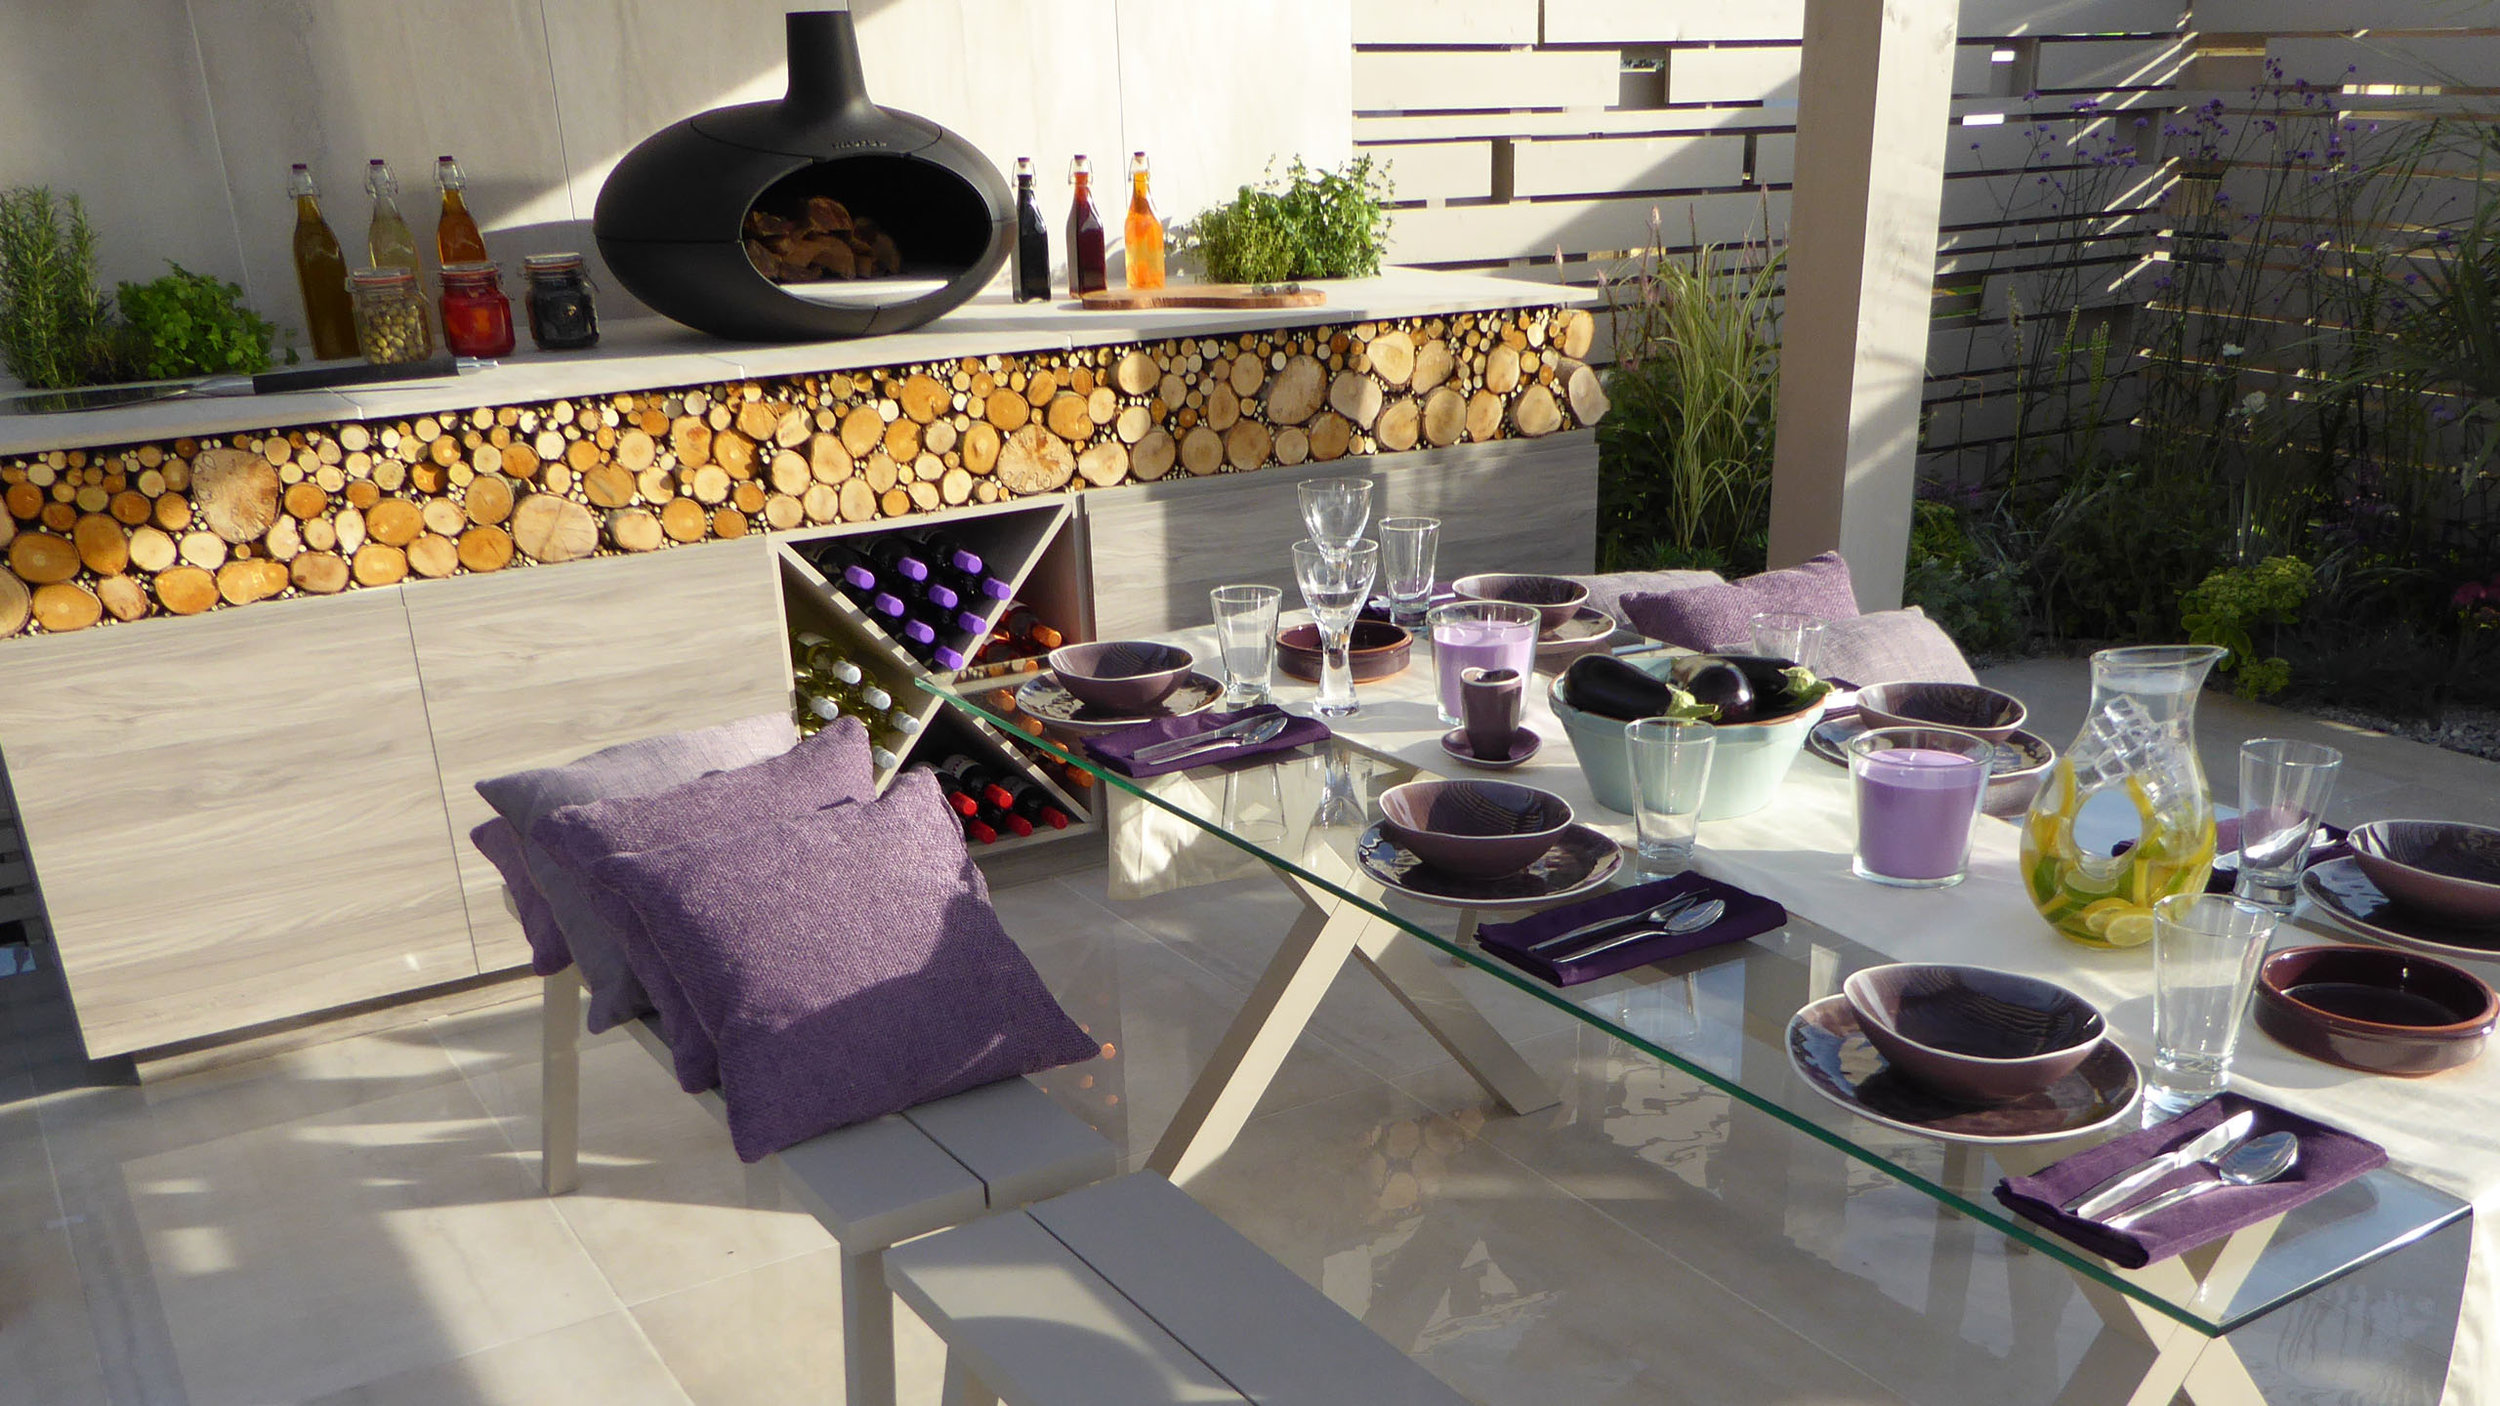 Southport Garden Design: A View Of The Olive Tree: Outdoor Kitchen, Morso Oven and Seating Area